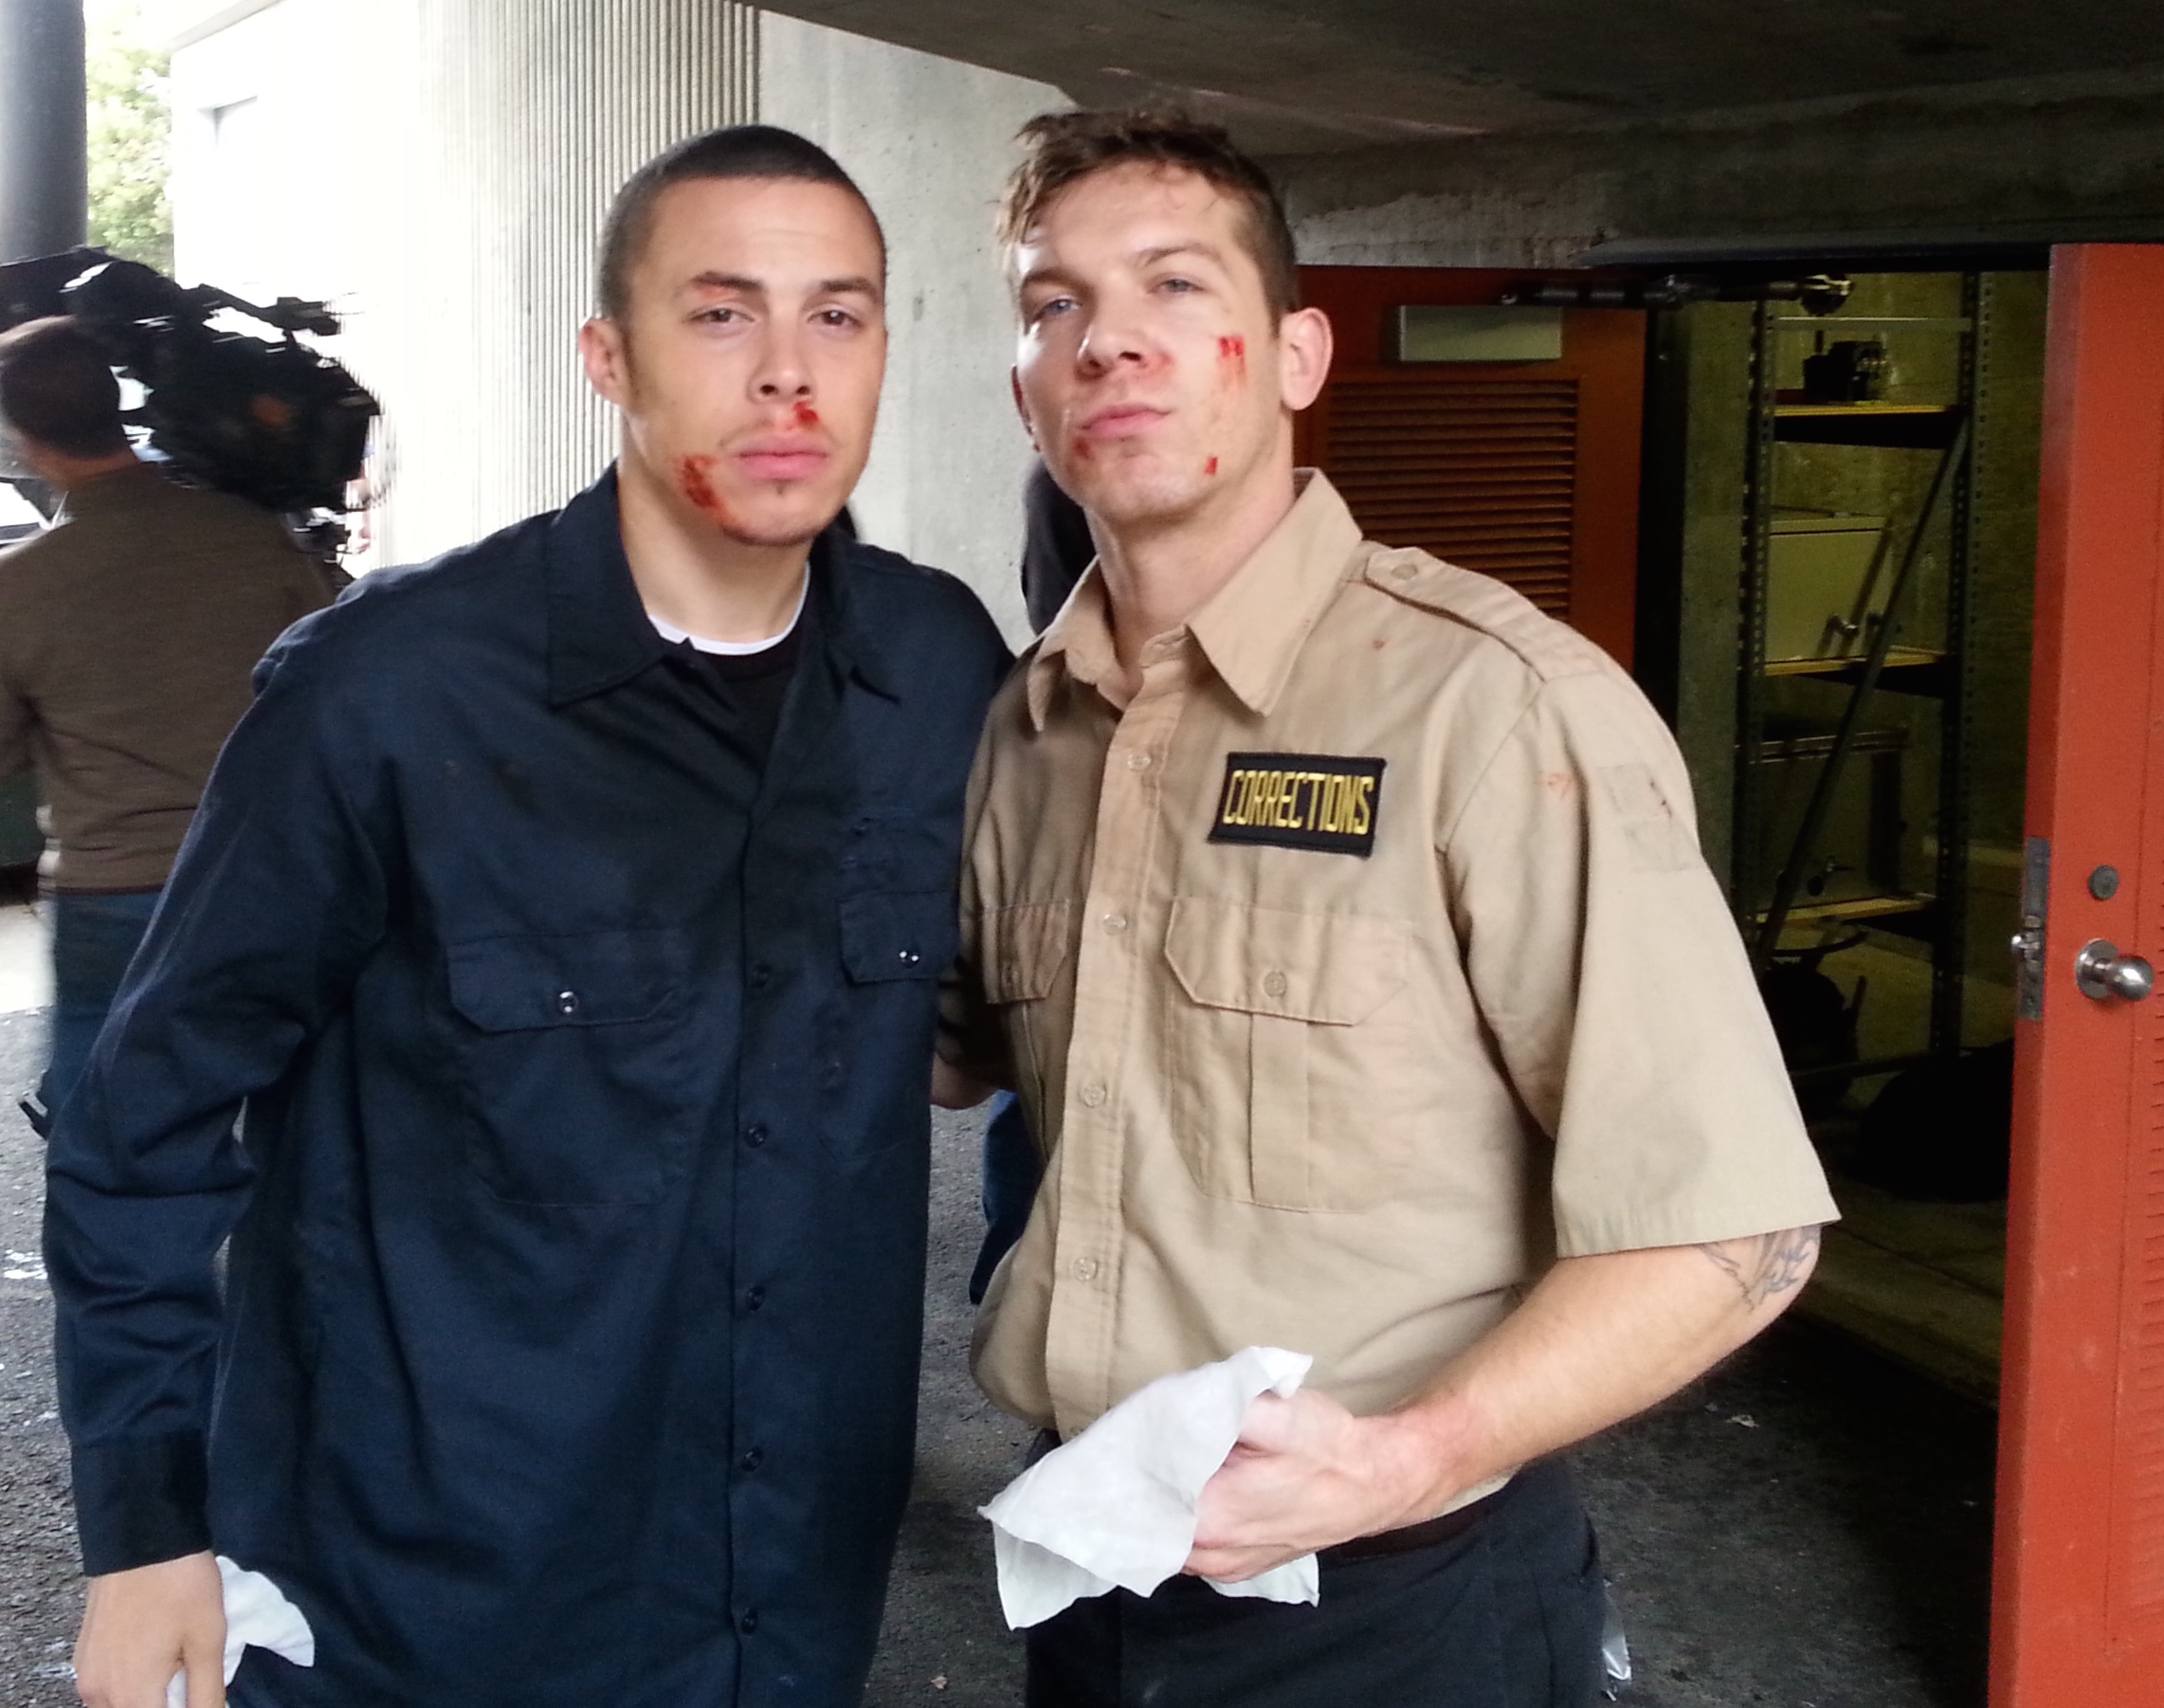 From left to right John Orantes and Adam Reeser on the set of 